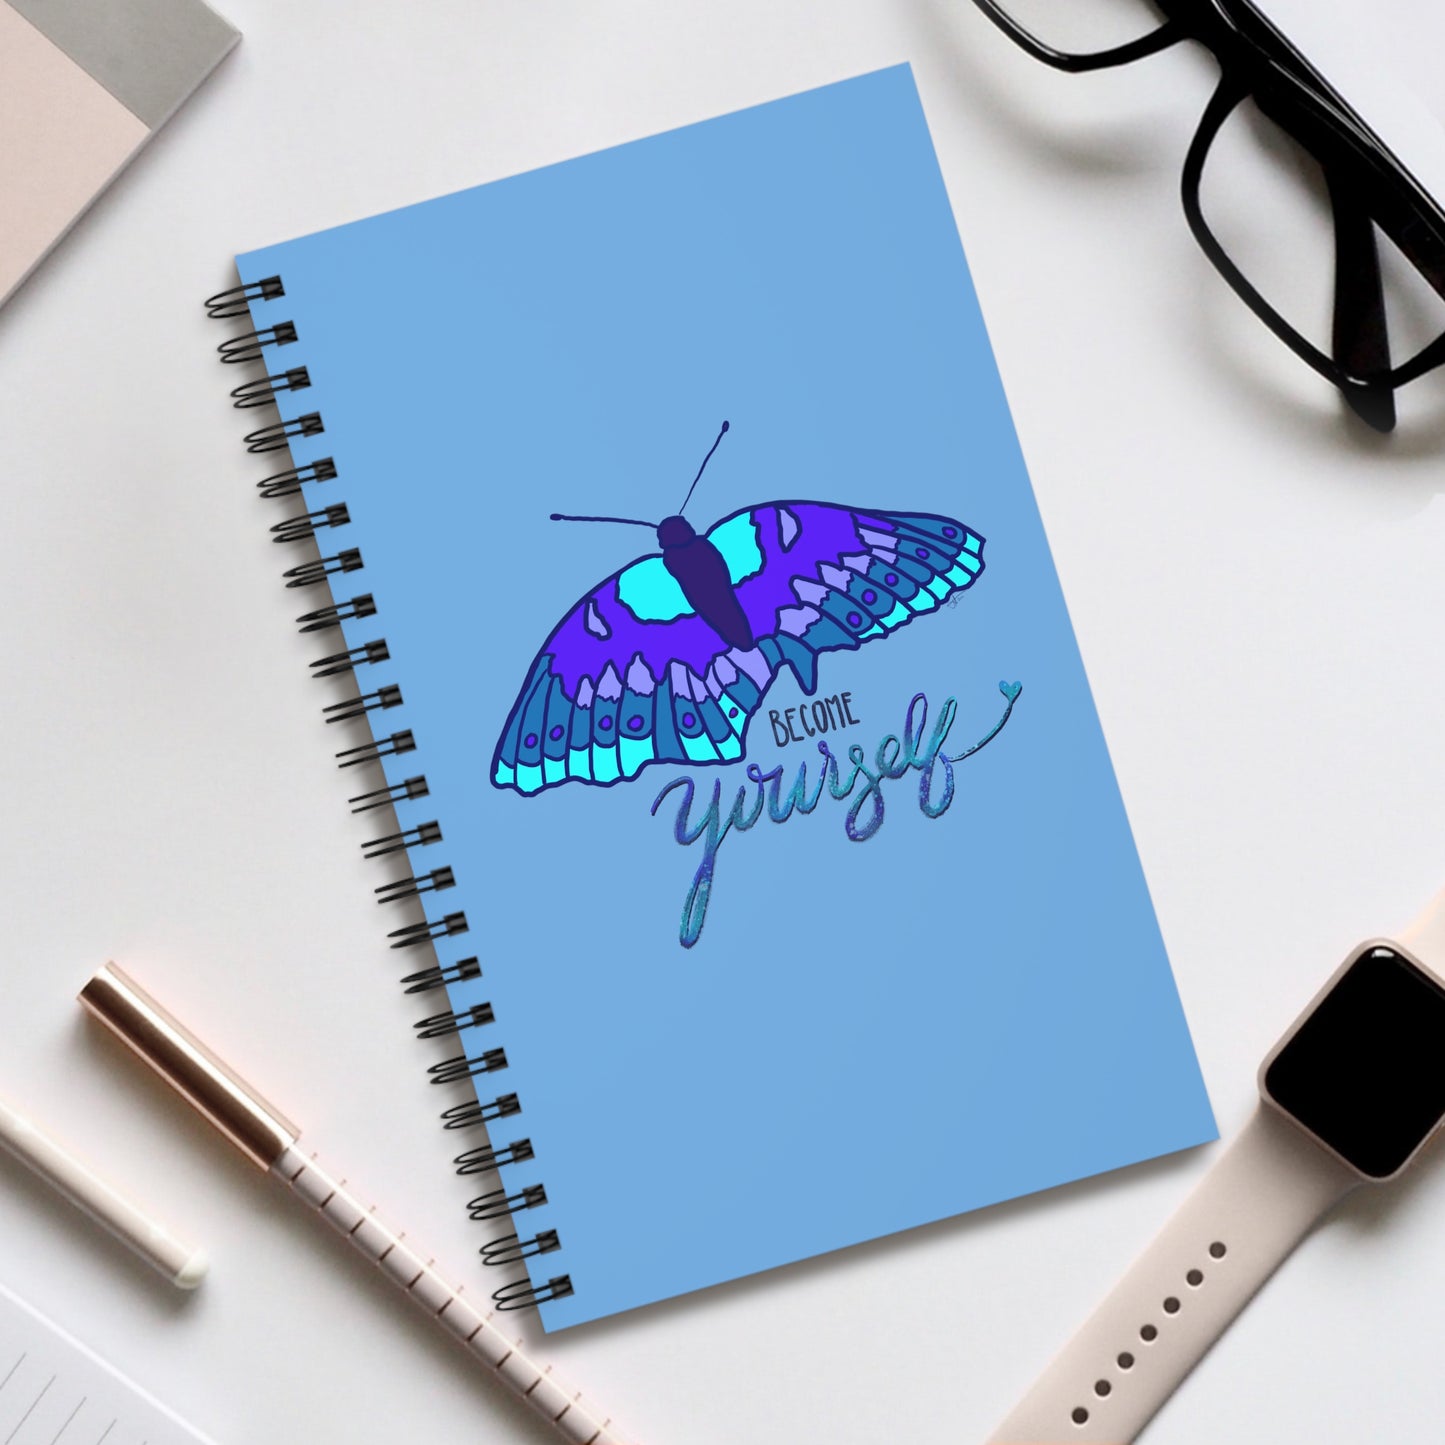 Become Yourself - Spiral Journal (Blue)